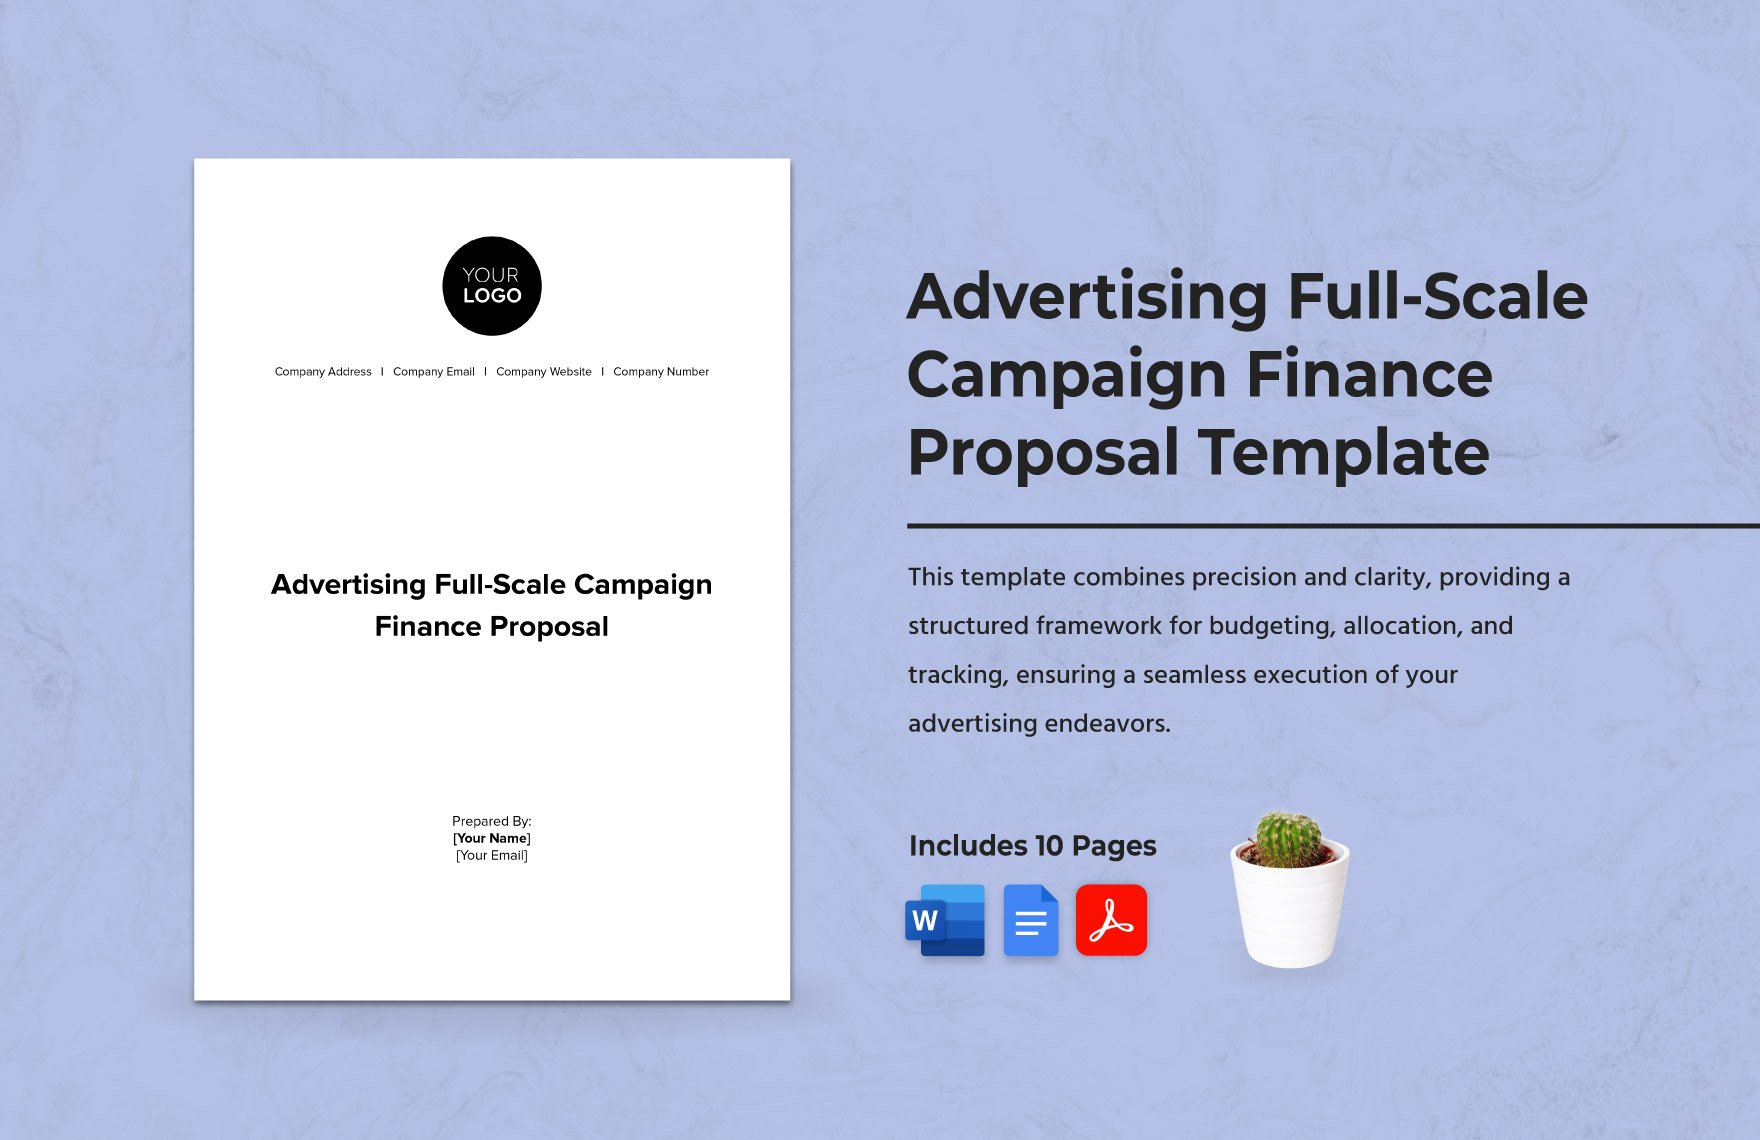 Advertising Full-Scale Campaign Finance Proposal Template in Word, Google Docs, PDF